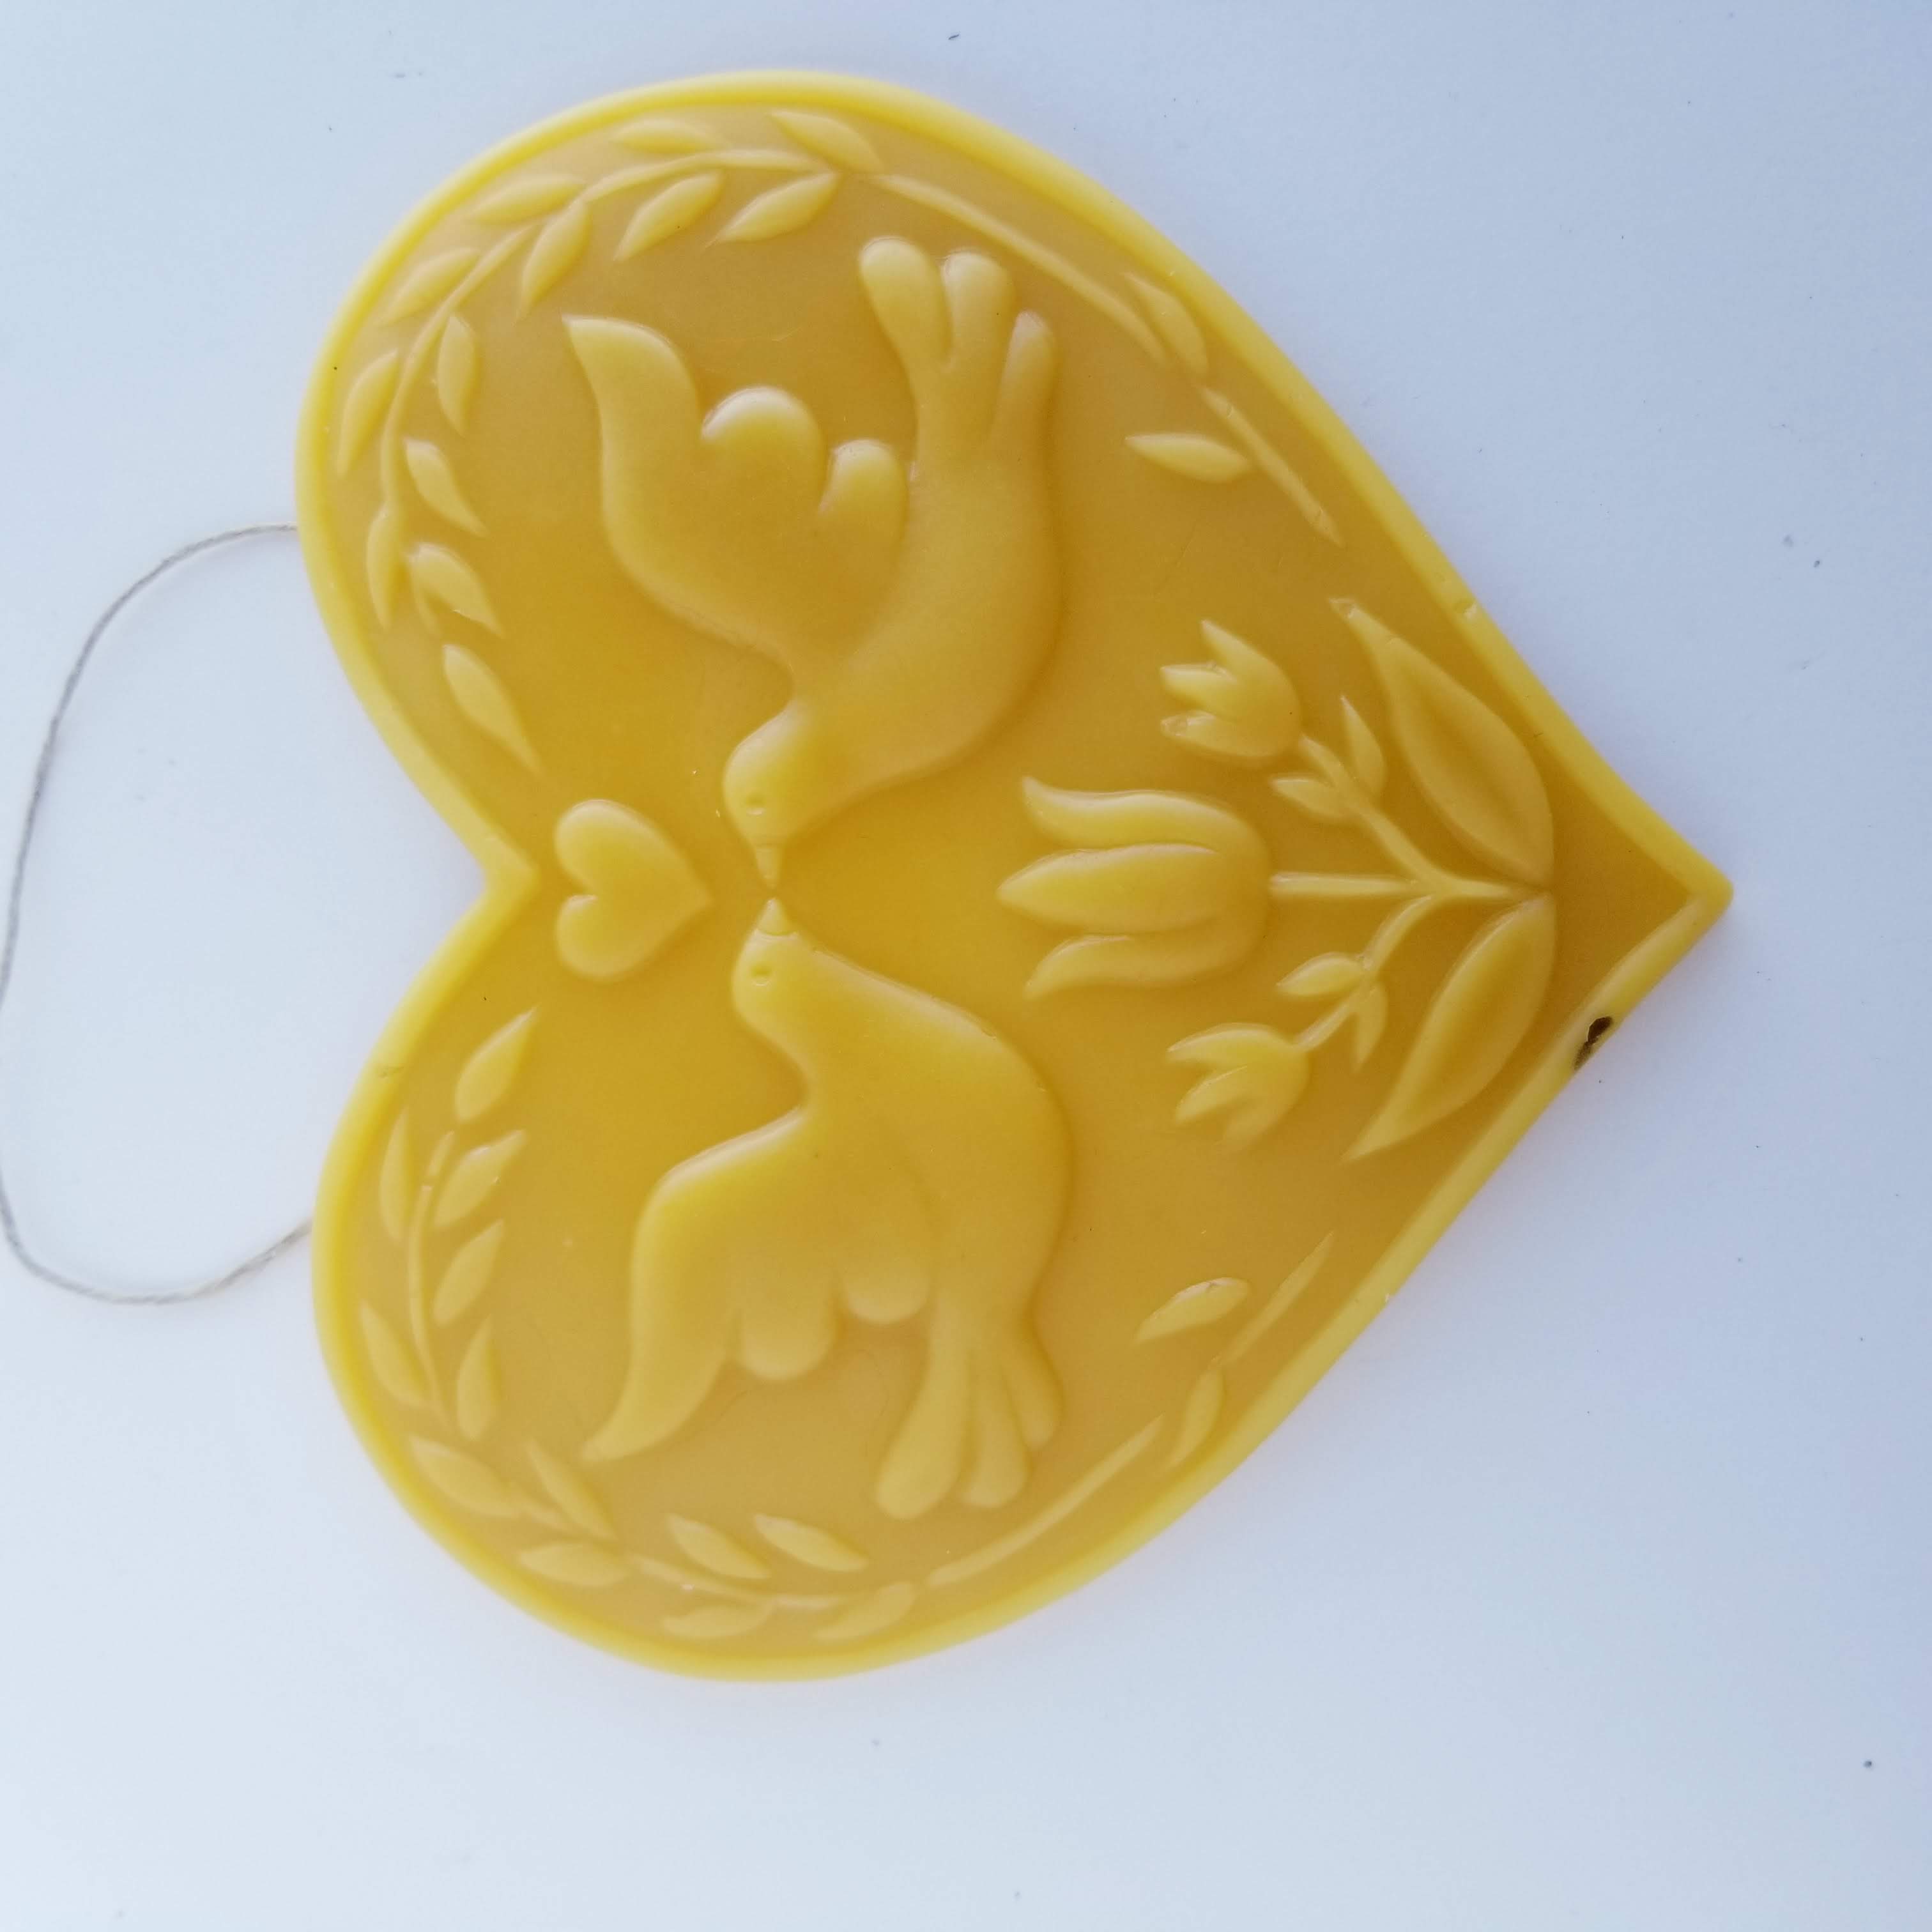 Carved Dutch Tulip and Doves Ornament - Yellow Beeswax